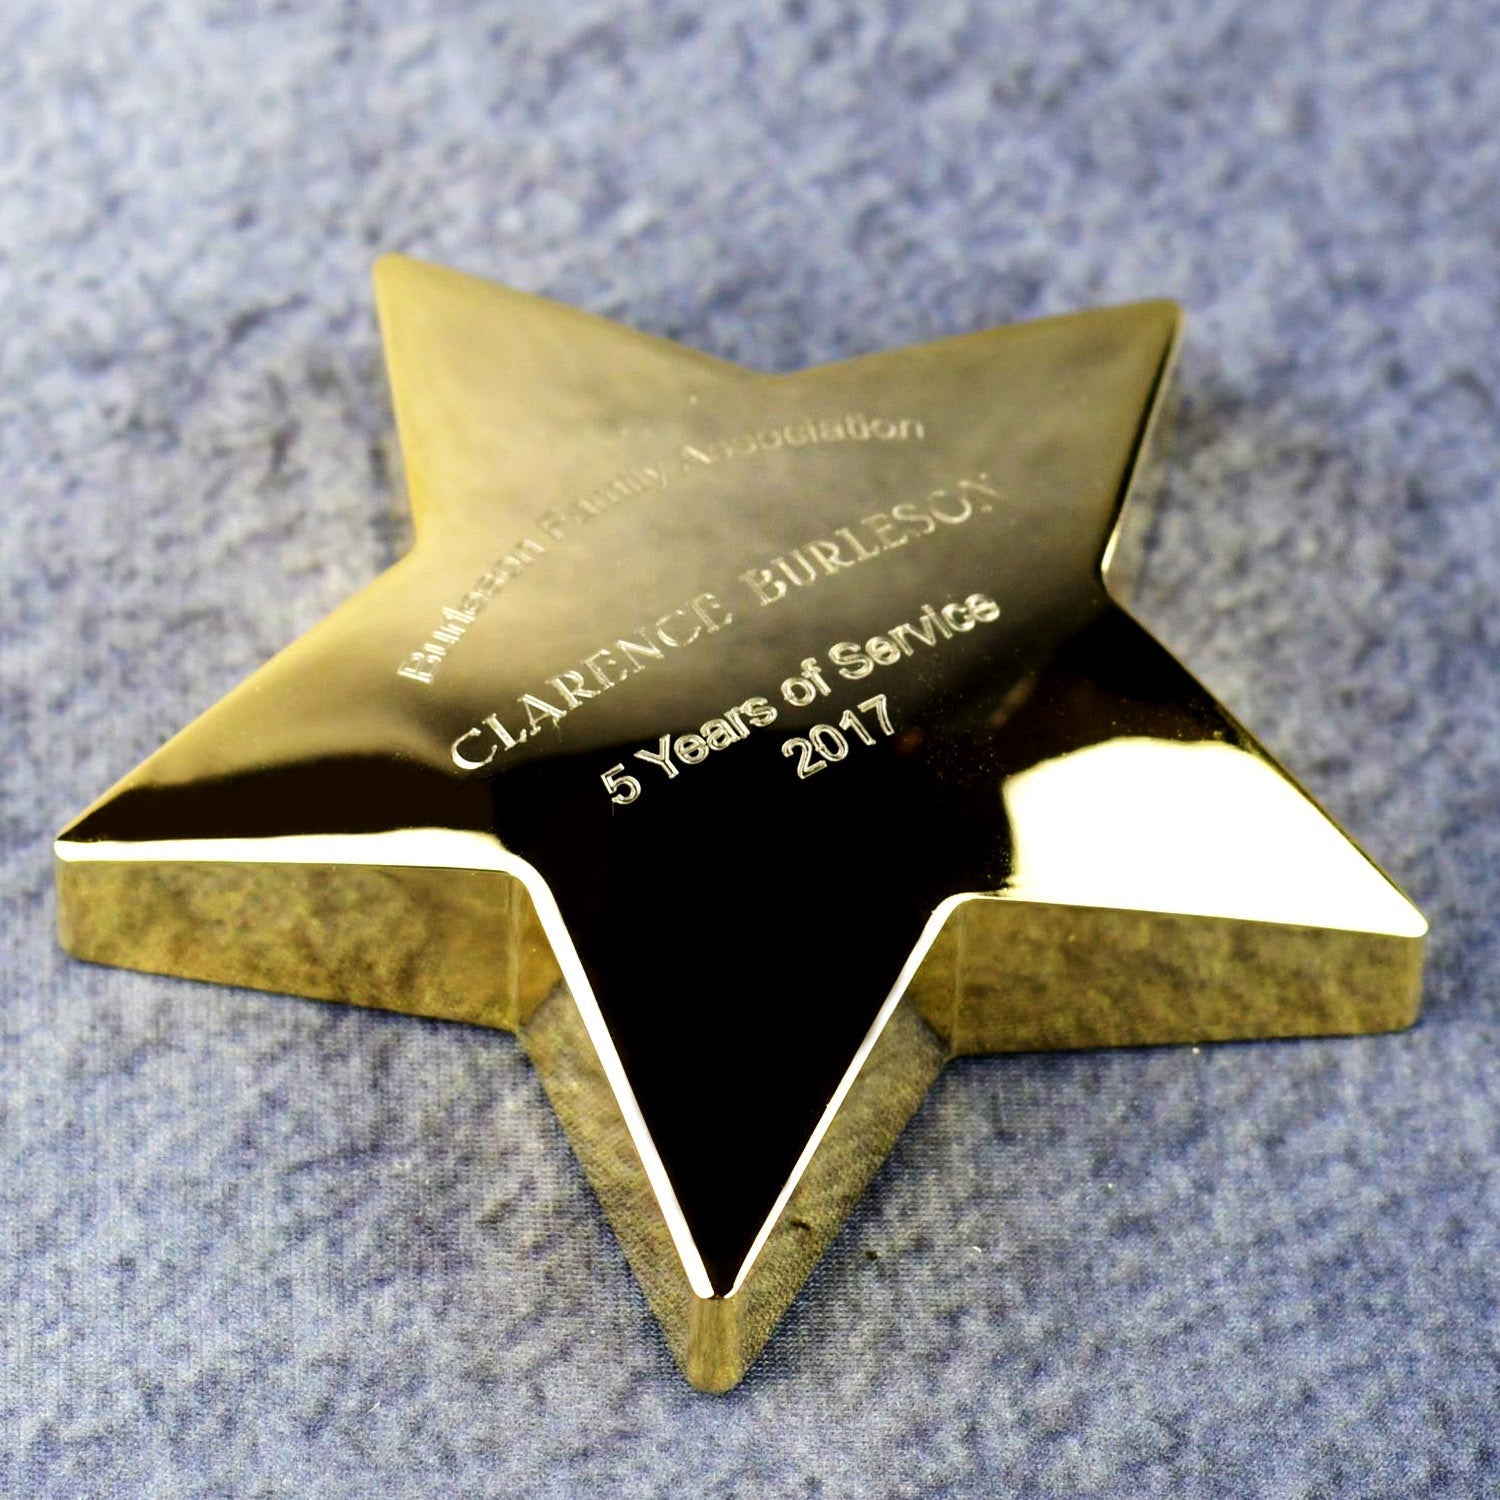 Star Performer Paperweight